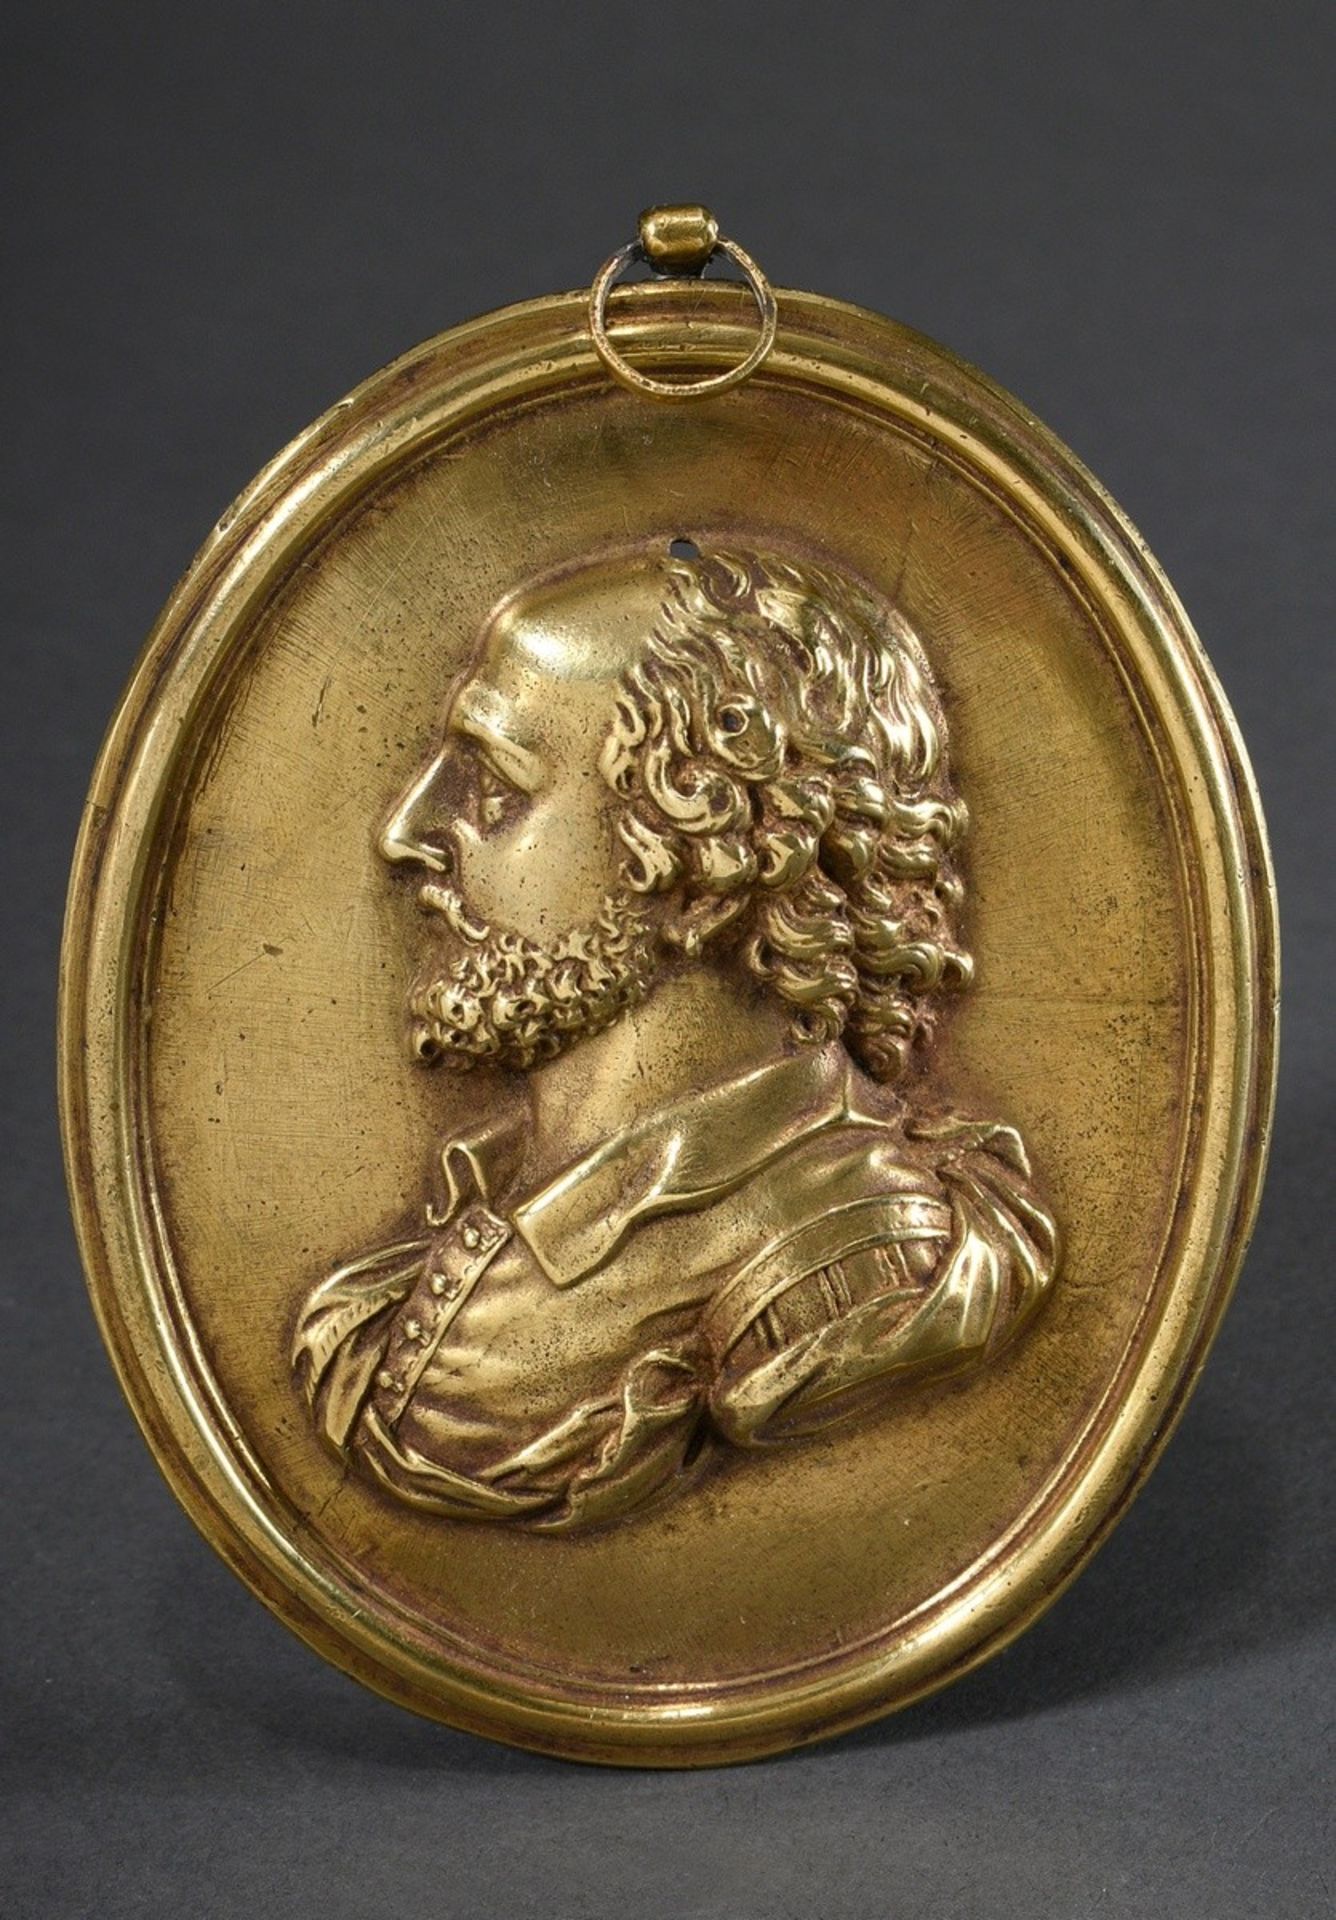 Polished bronze relief plaque "William Shakespeare" in oval form, 18th/19th c.,11x9cm, slight scrat